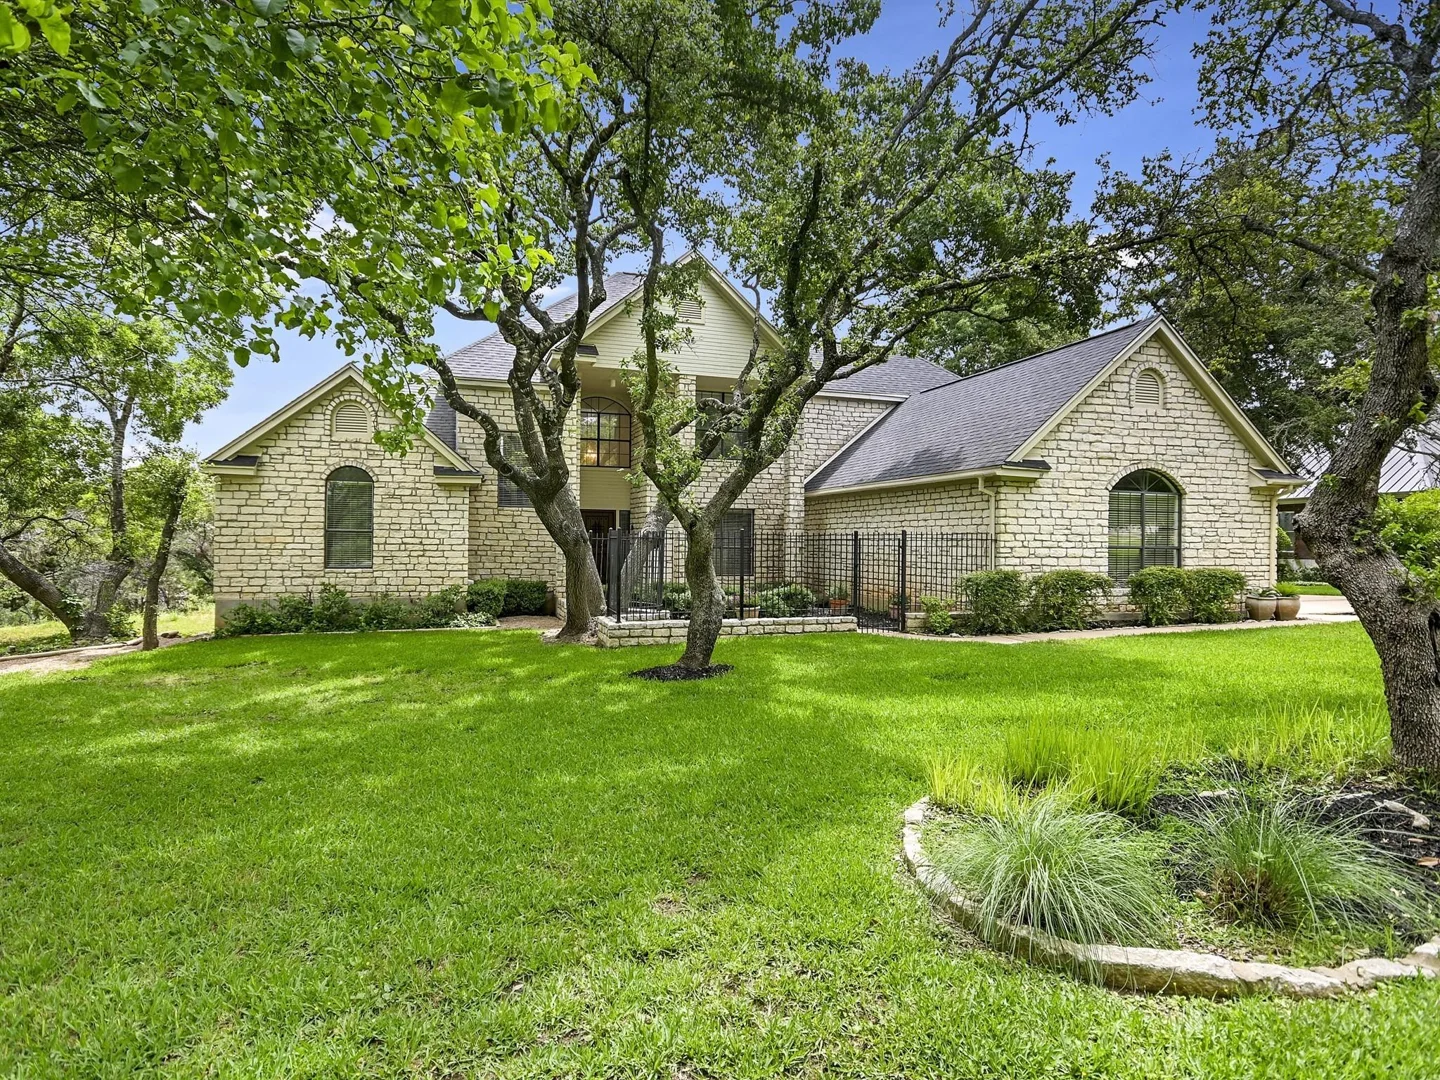 Discover Tranquility: Hill Country Charm in Barton Creek